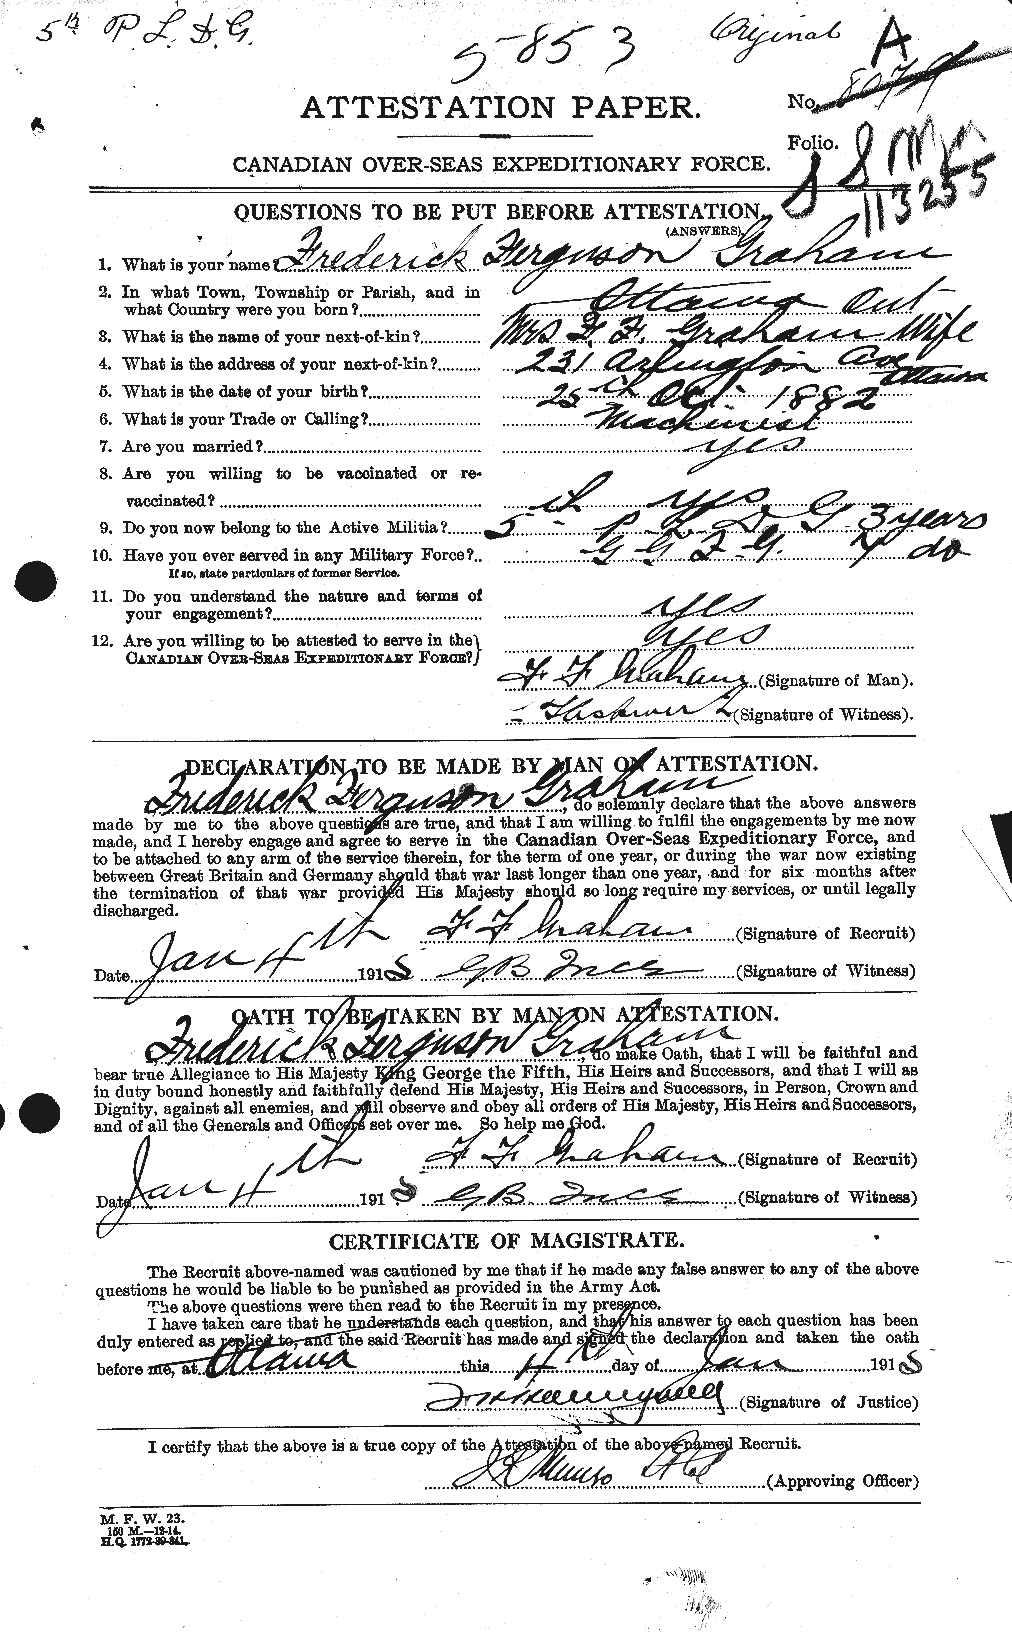 Personnel Records of the First World War - CEF 357610a